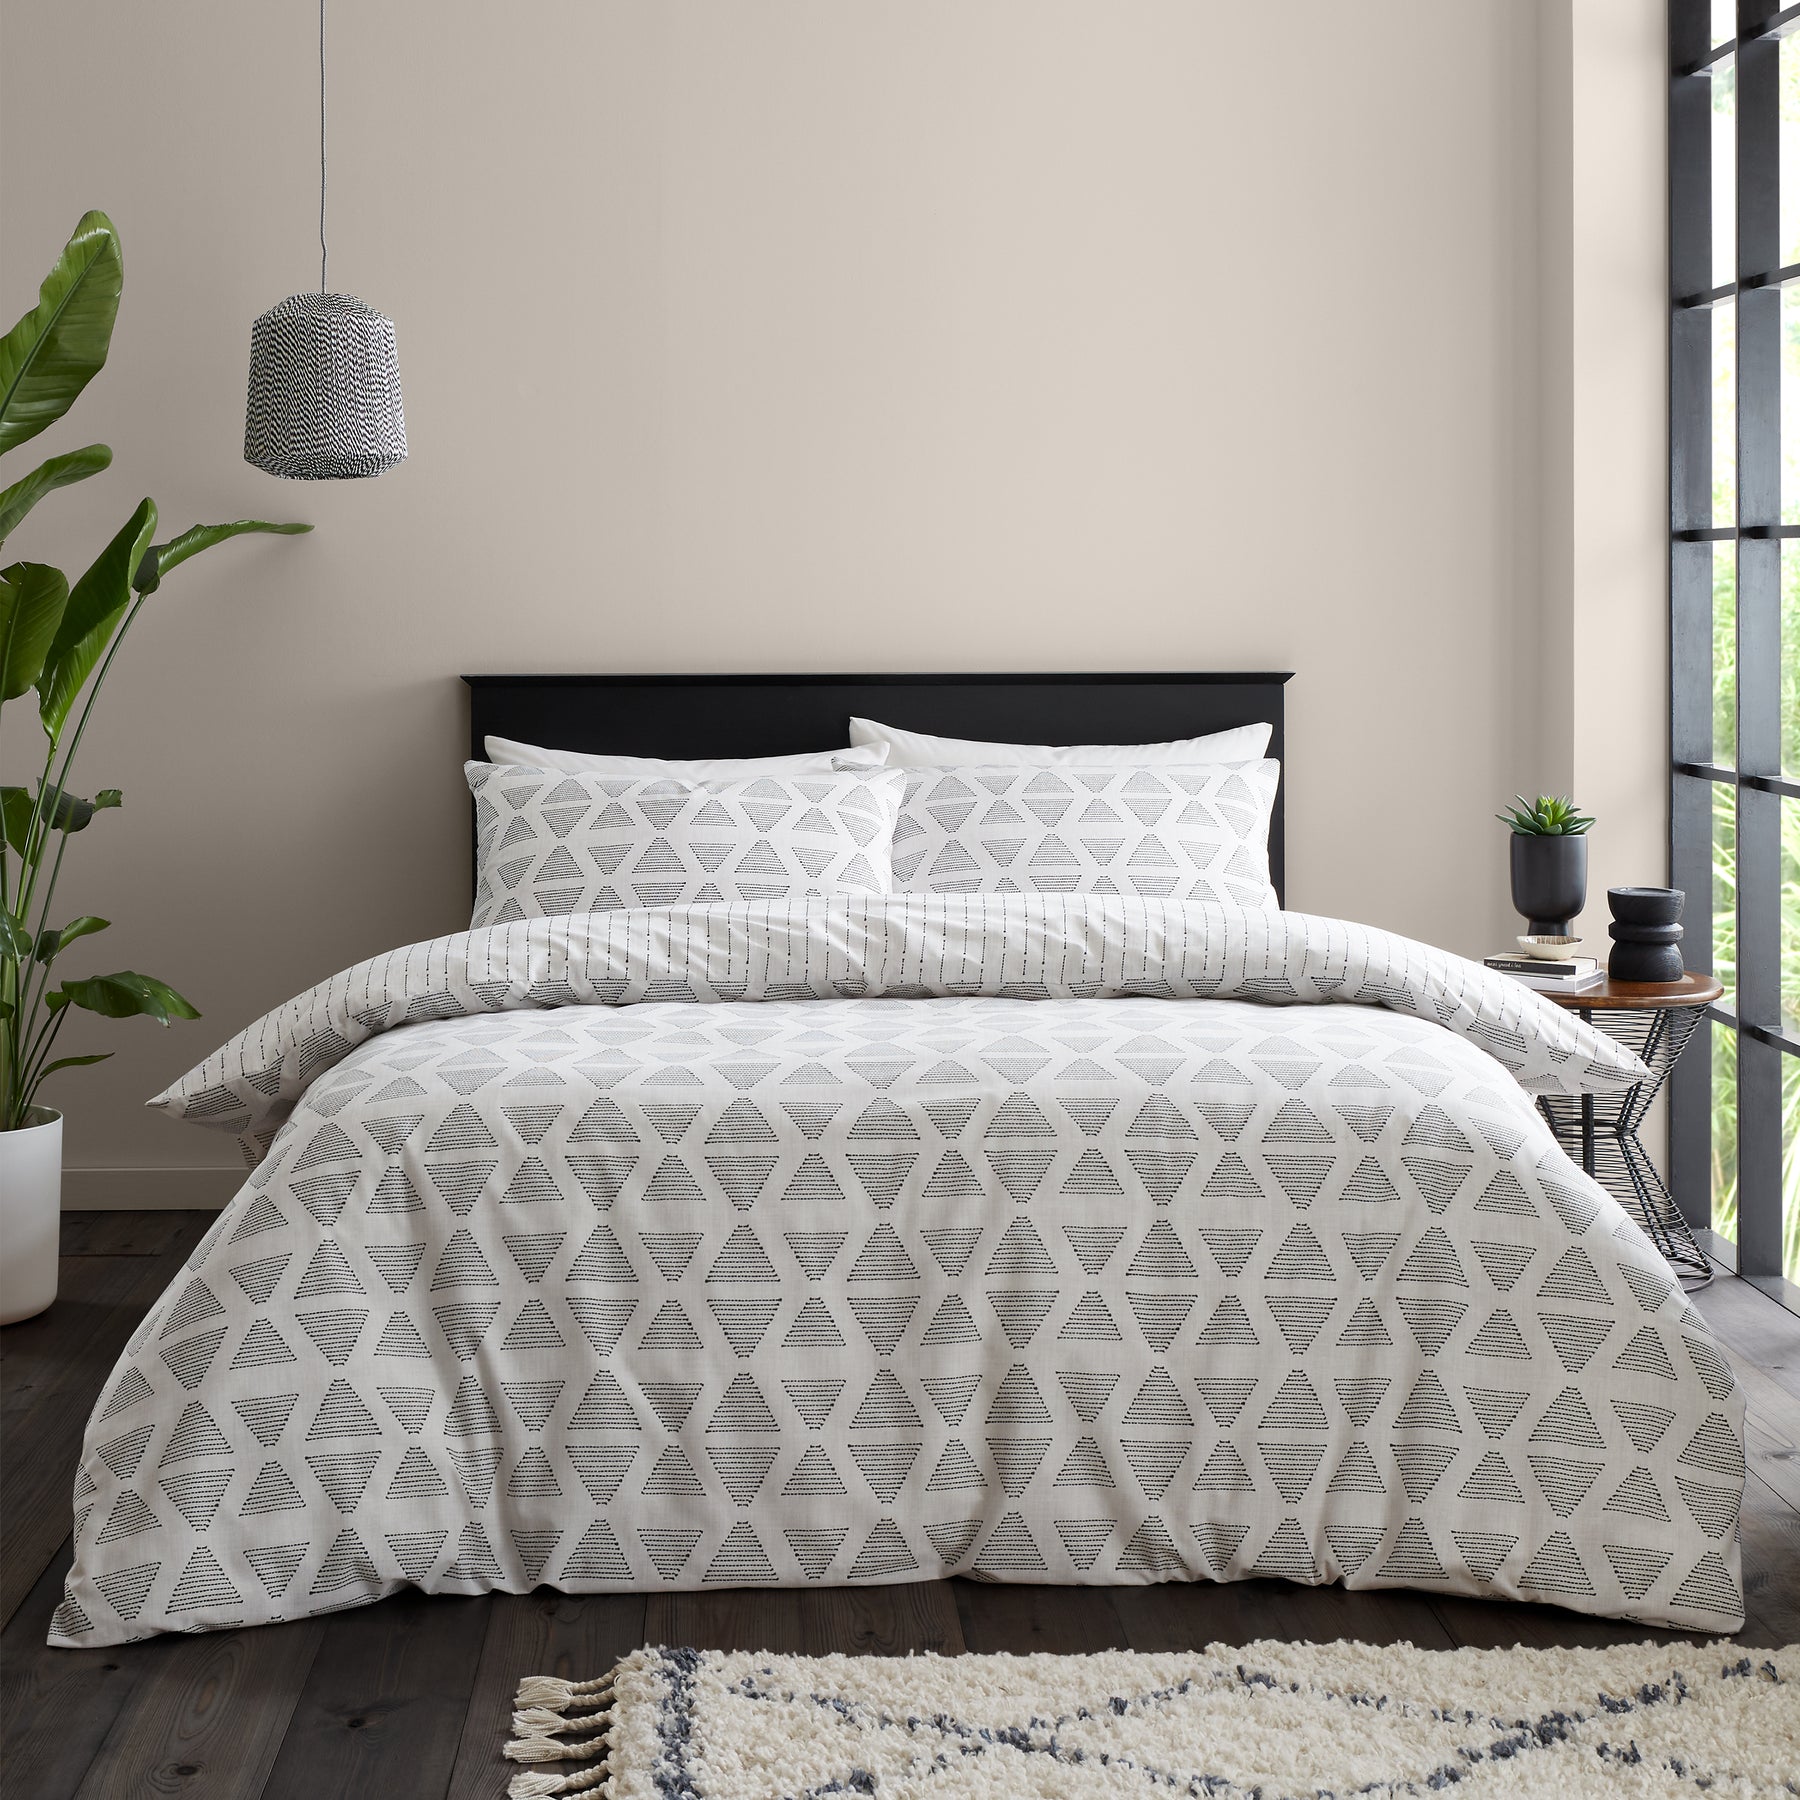 Catherine Lansfield Tufted Print Bedding Set Natural